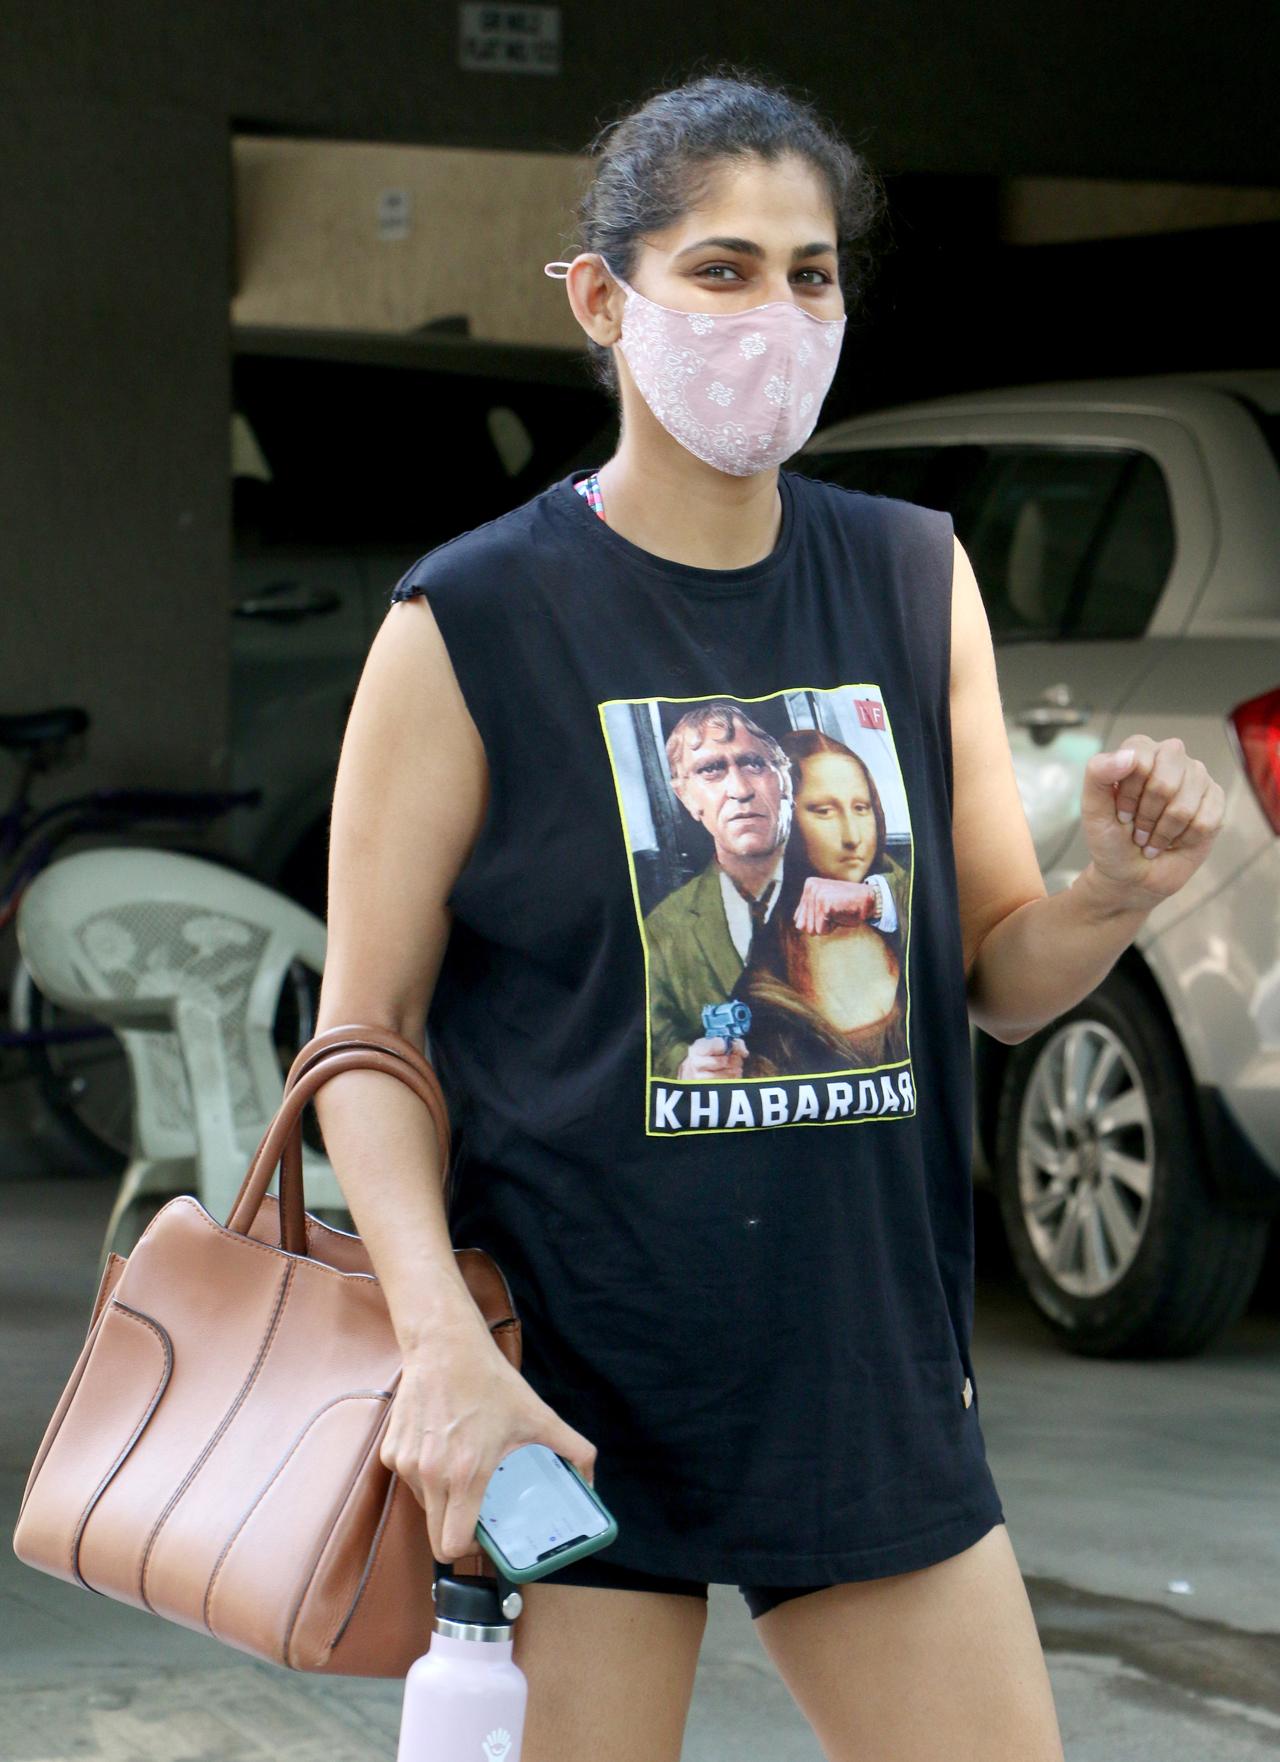 Kubbra Sait was snapped in her gym gears in Bandra, Mumbai. The print on Kubbra's t-shirt, which read 